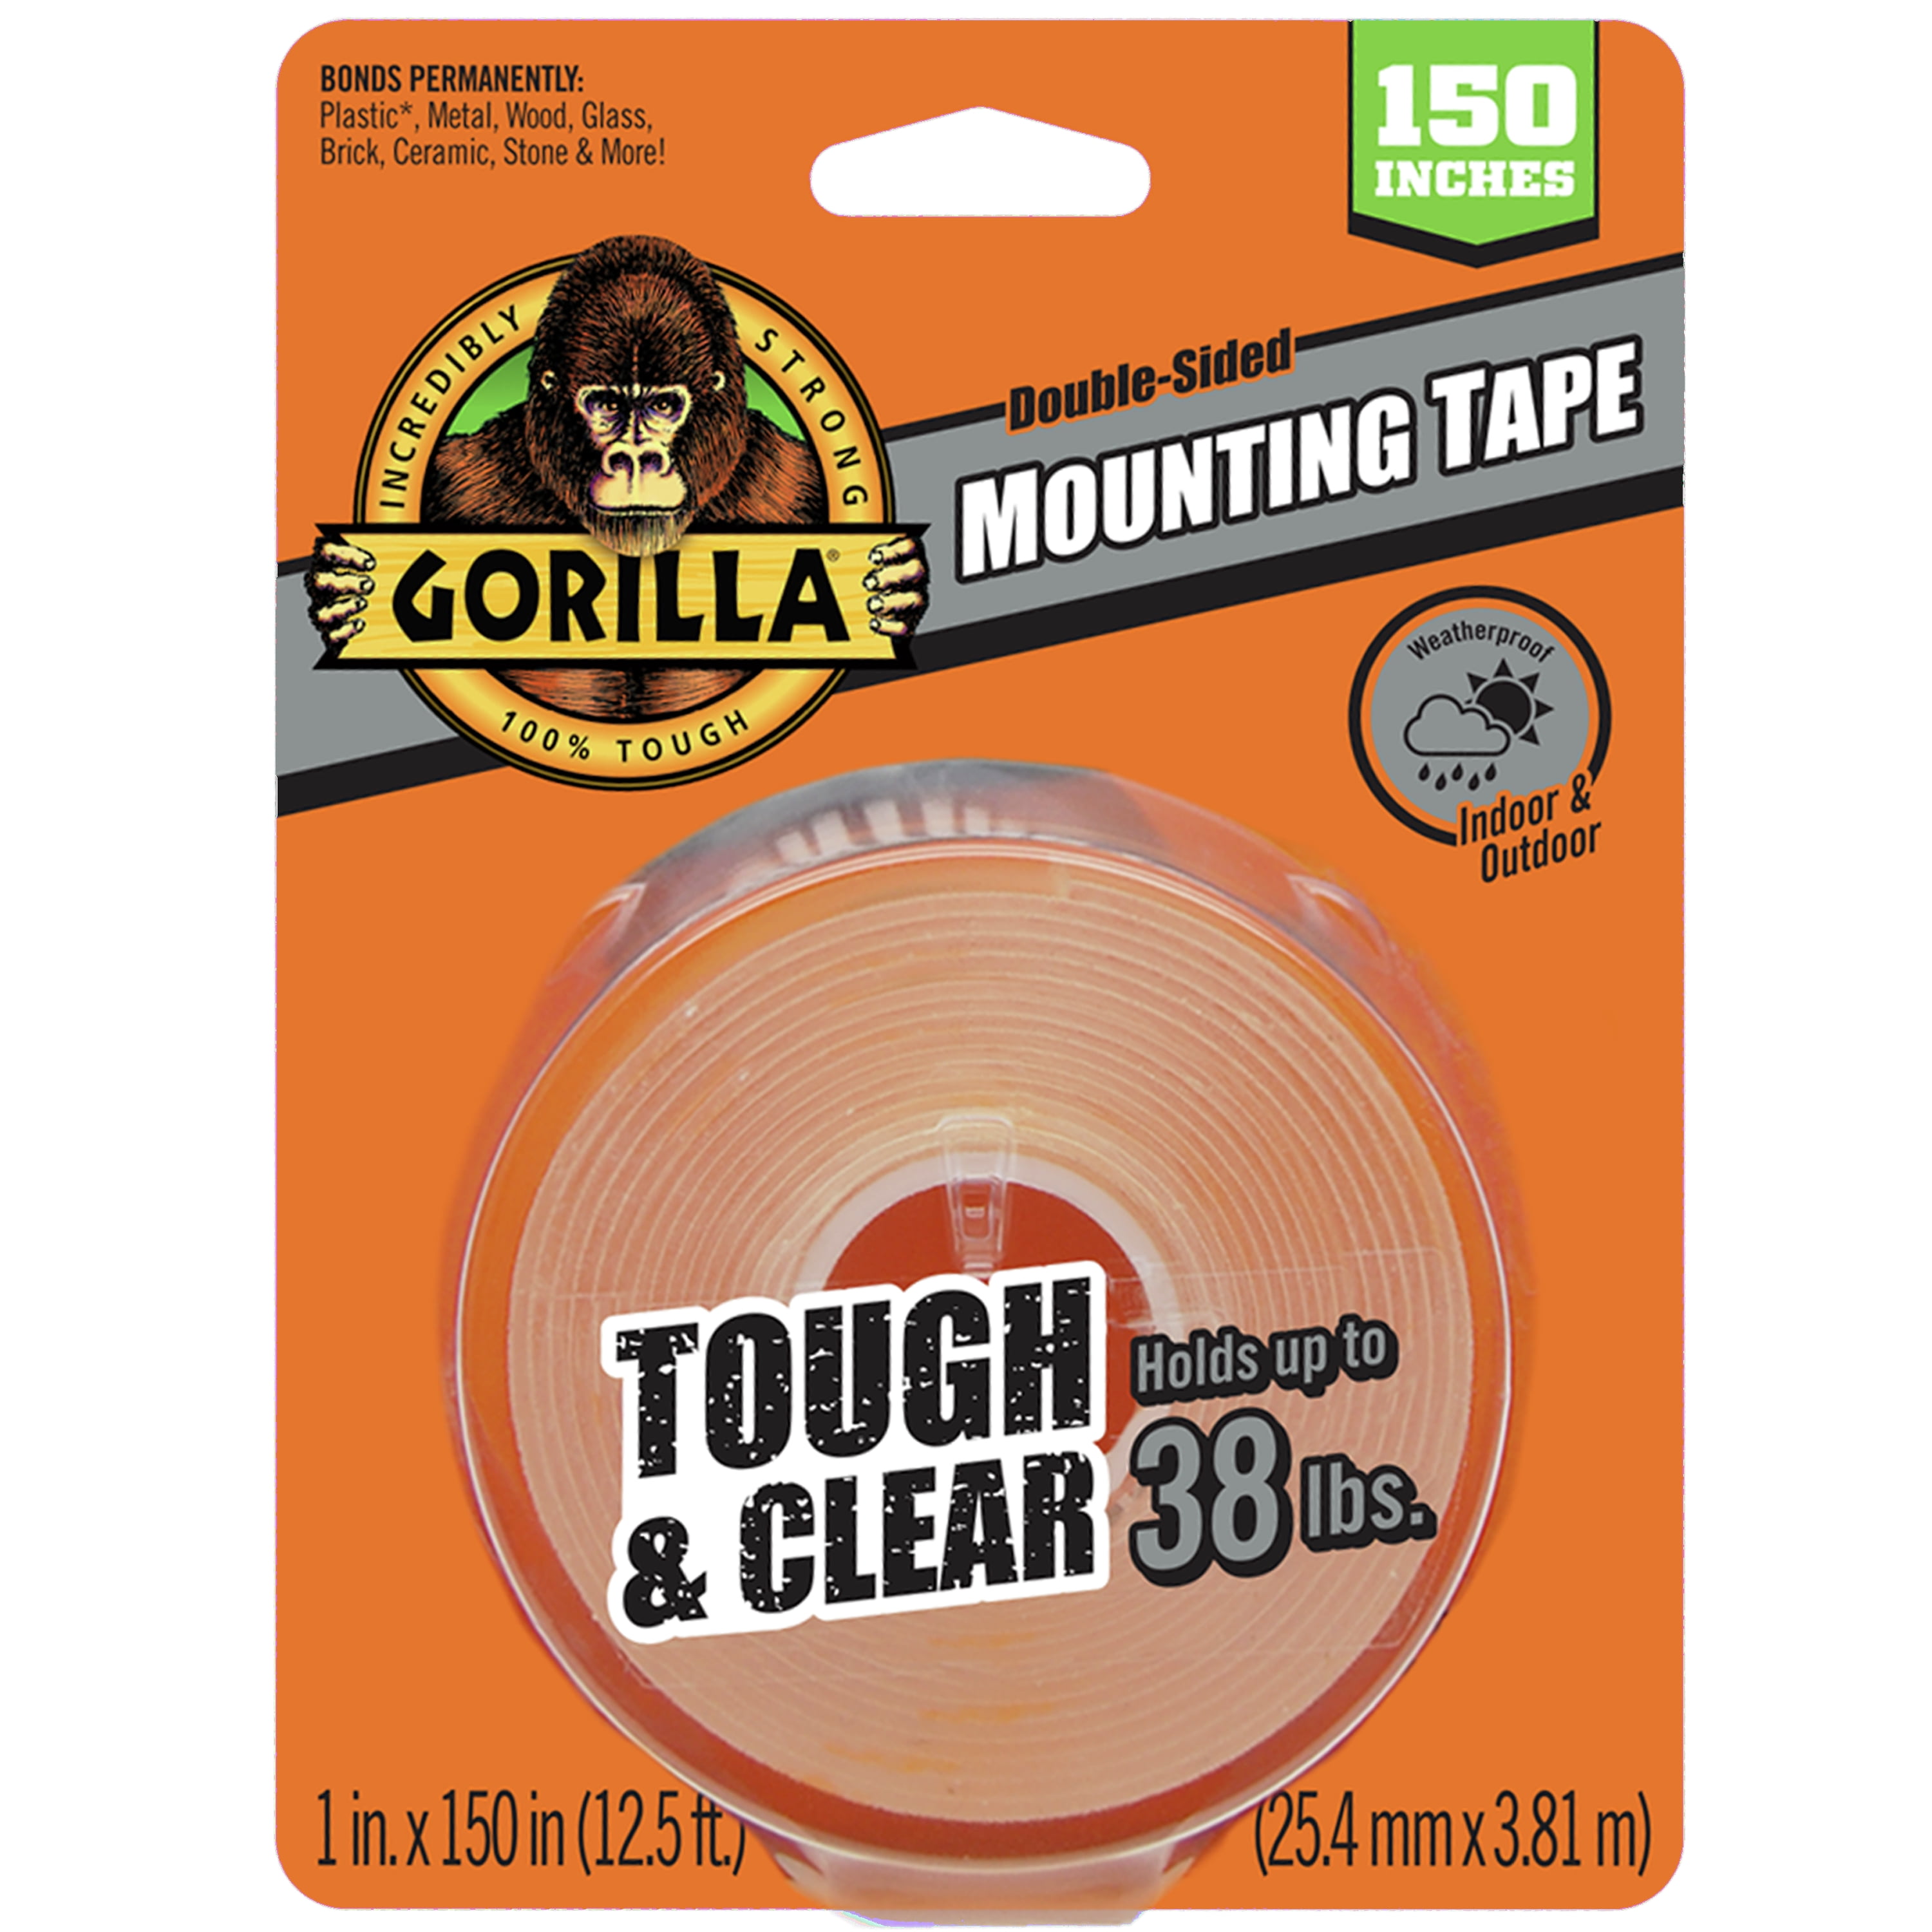 Gorilla Tough & Clear Double-Sided Mounting Tape, 60